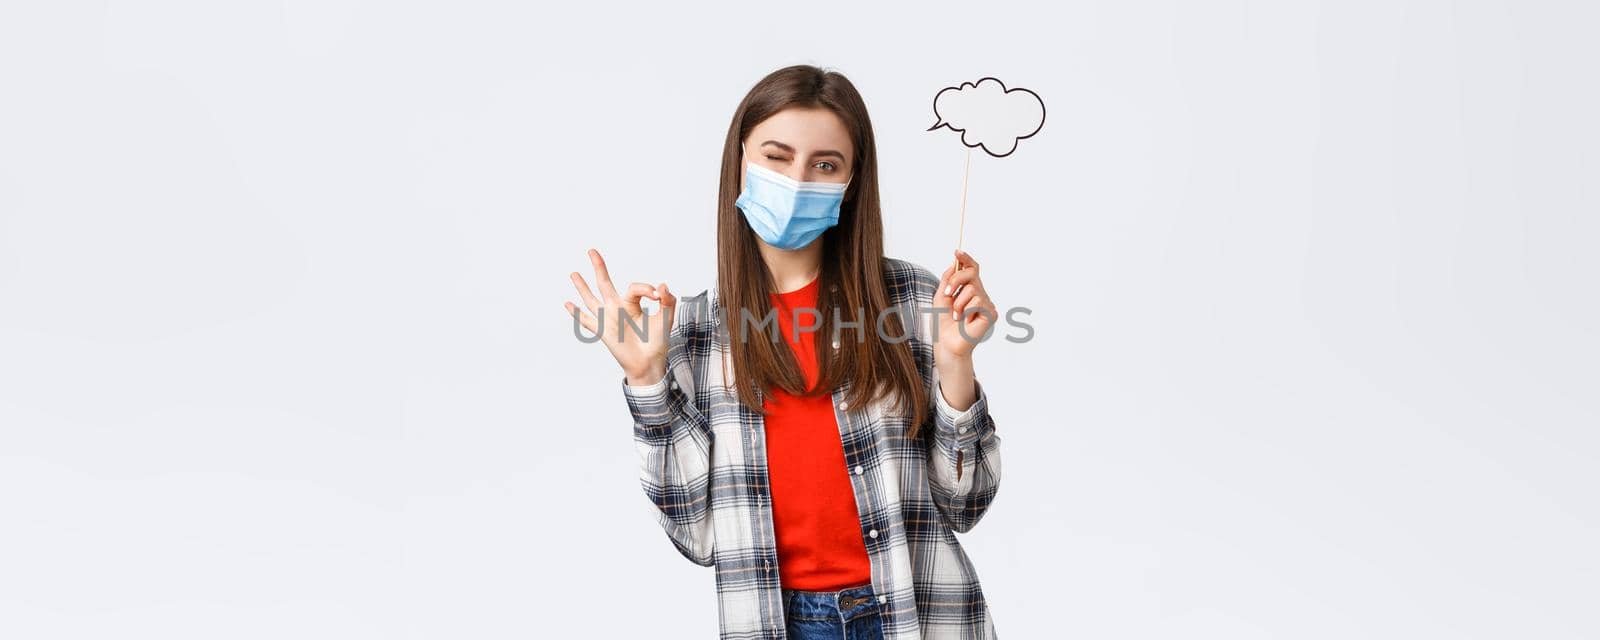 Coronavirus outbreak, leisure on quarantine, social distancing and emotions concept. No problem, girl have good idea, wink assuring and show okay sign, wear medical mask, hold commend bubble.